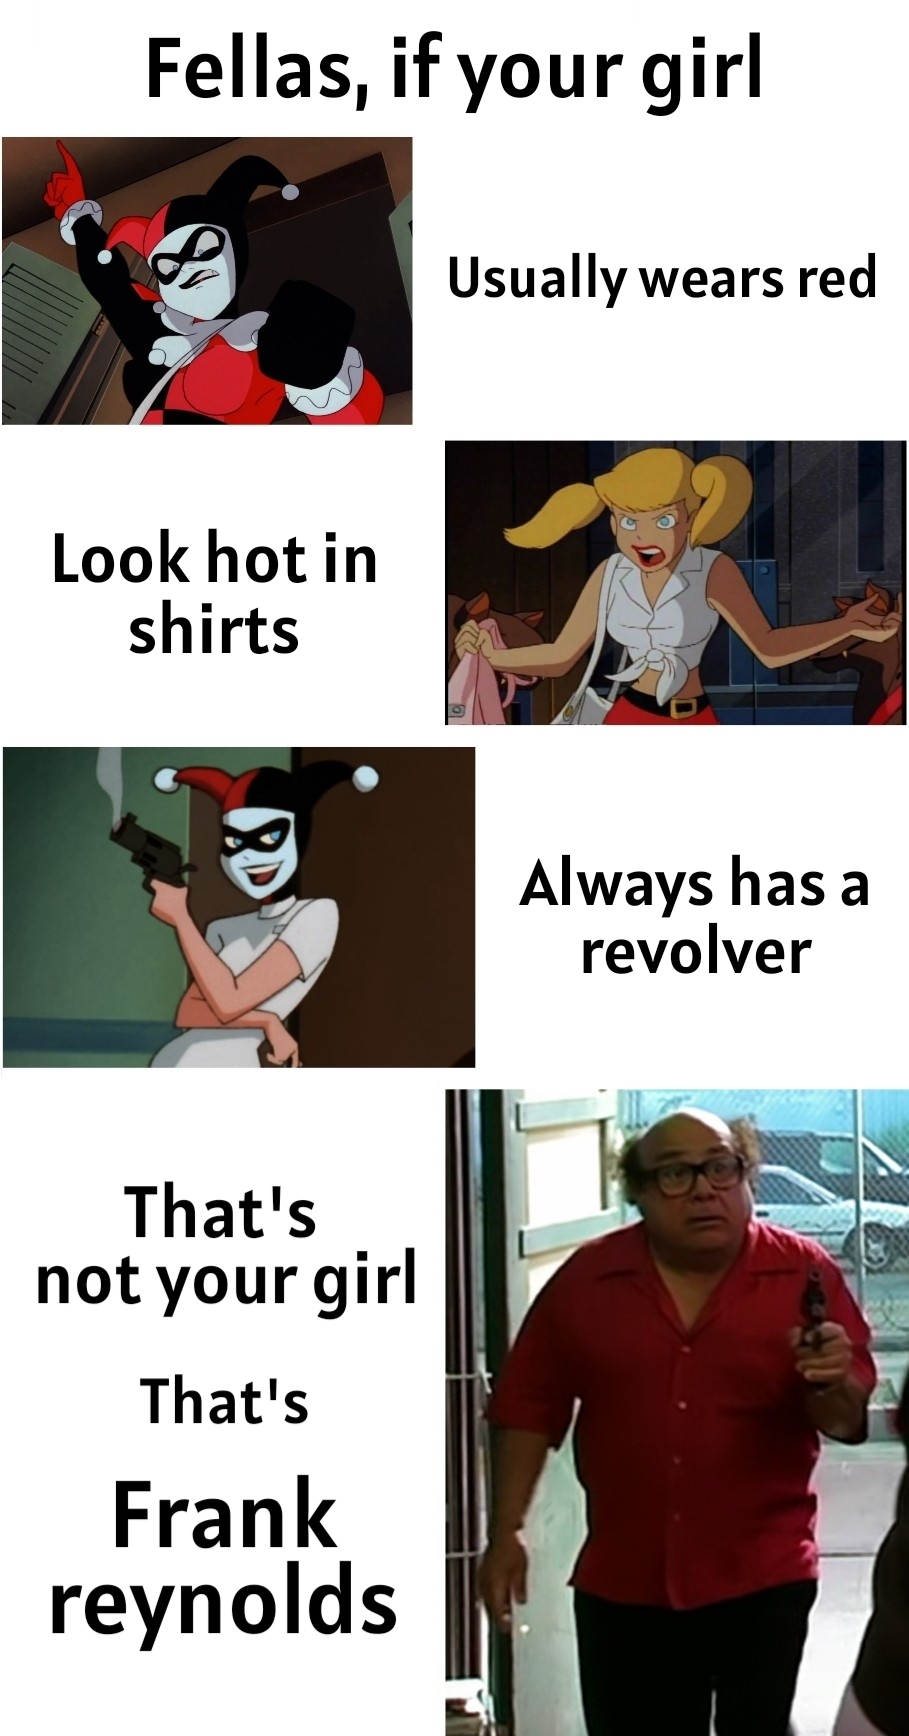 dank memes - - shoulder - Fellas, if your girl Look hot in shirts Dd That's not your girl That's Frank reynolds Usually wears red Always has a revolver